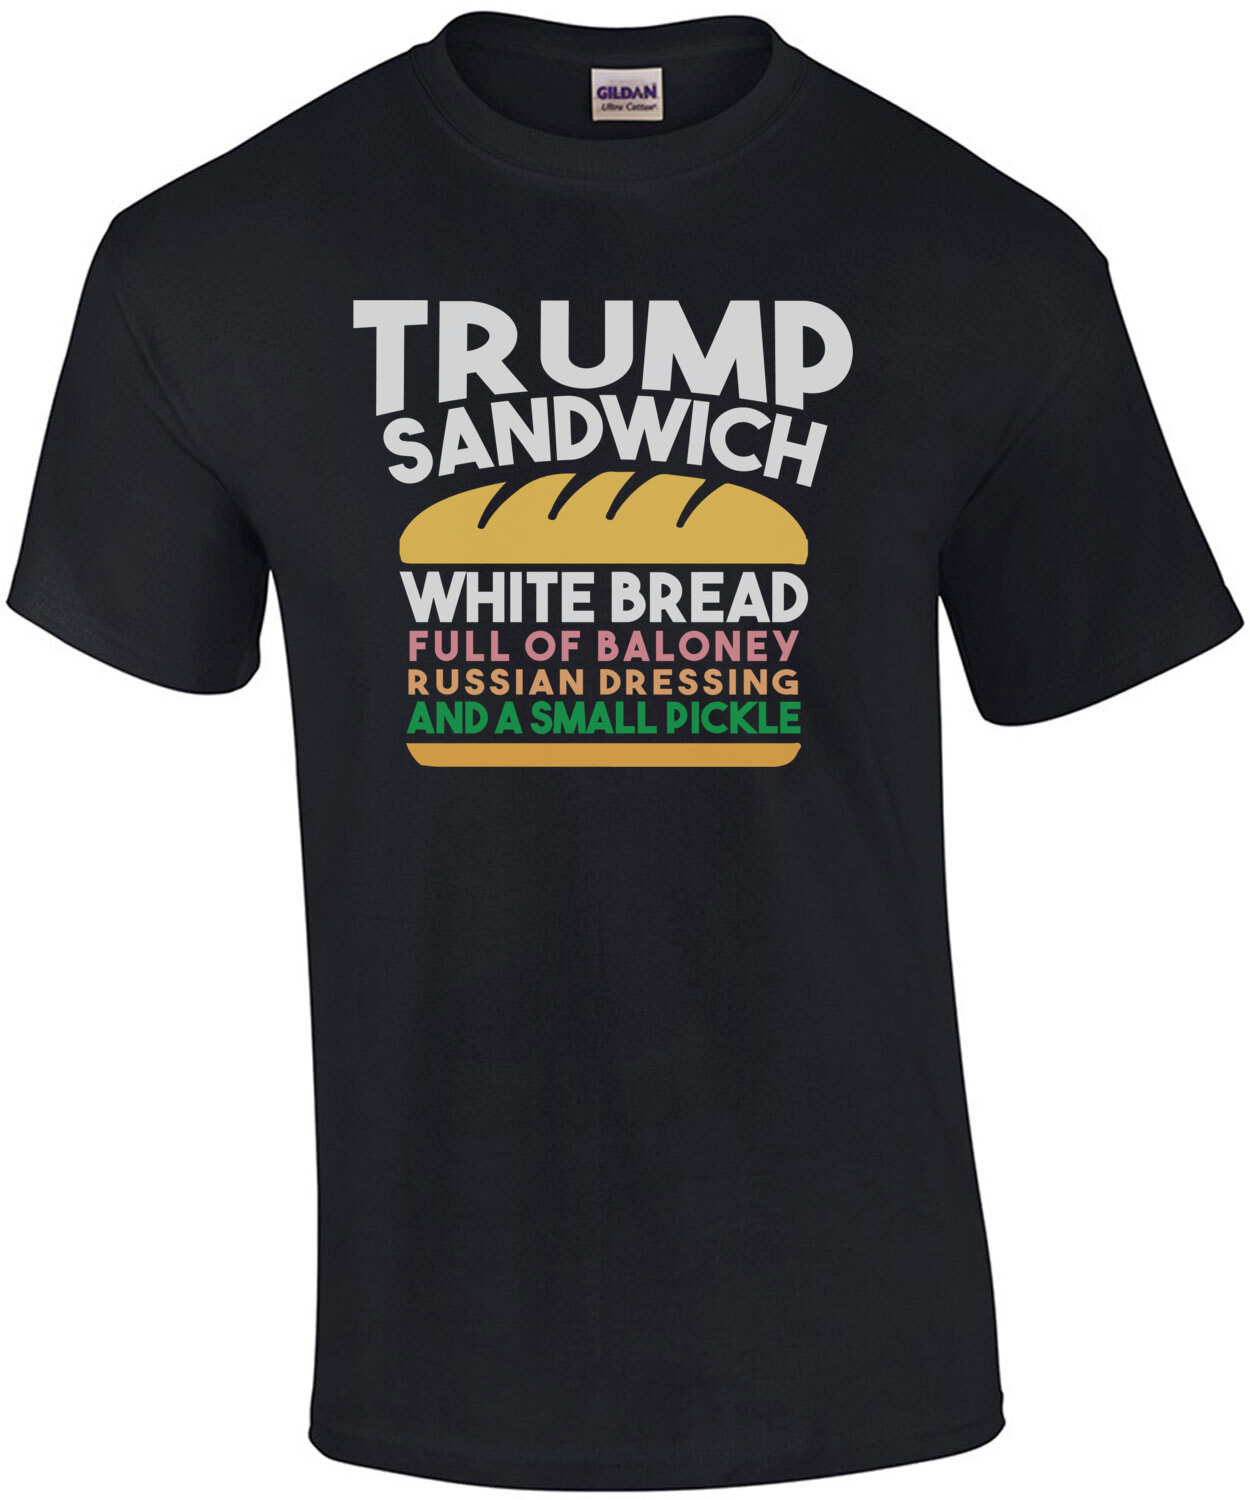 Trump Sandwich - White Bread, Full of Baloney, Russian Dressing, and a small pickly - anti trump t-shirt